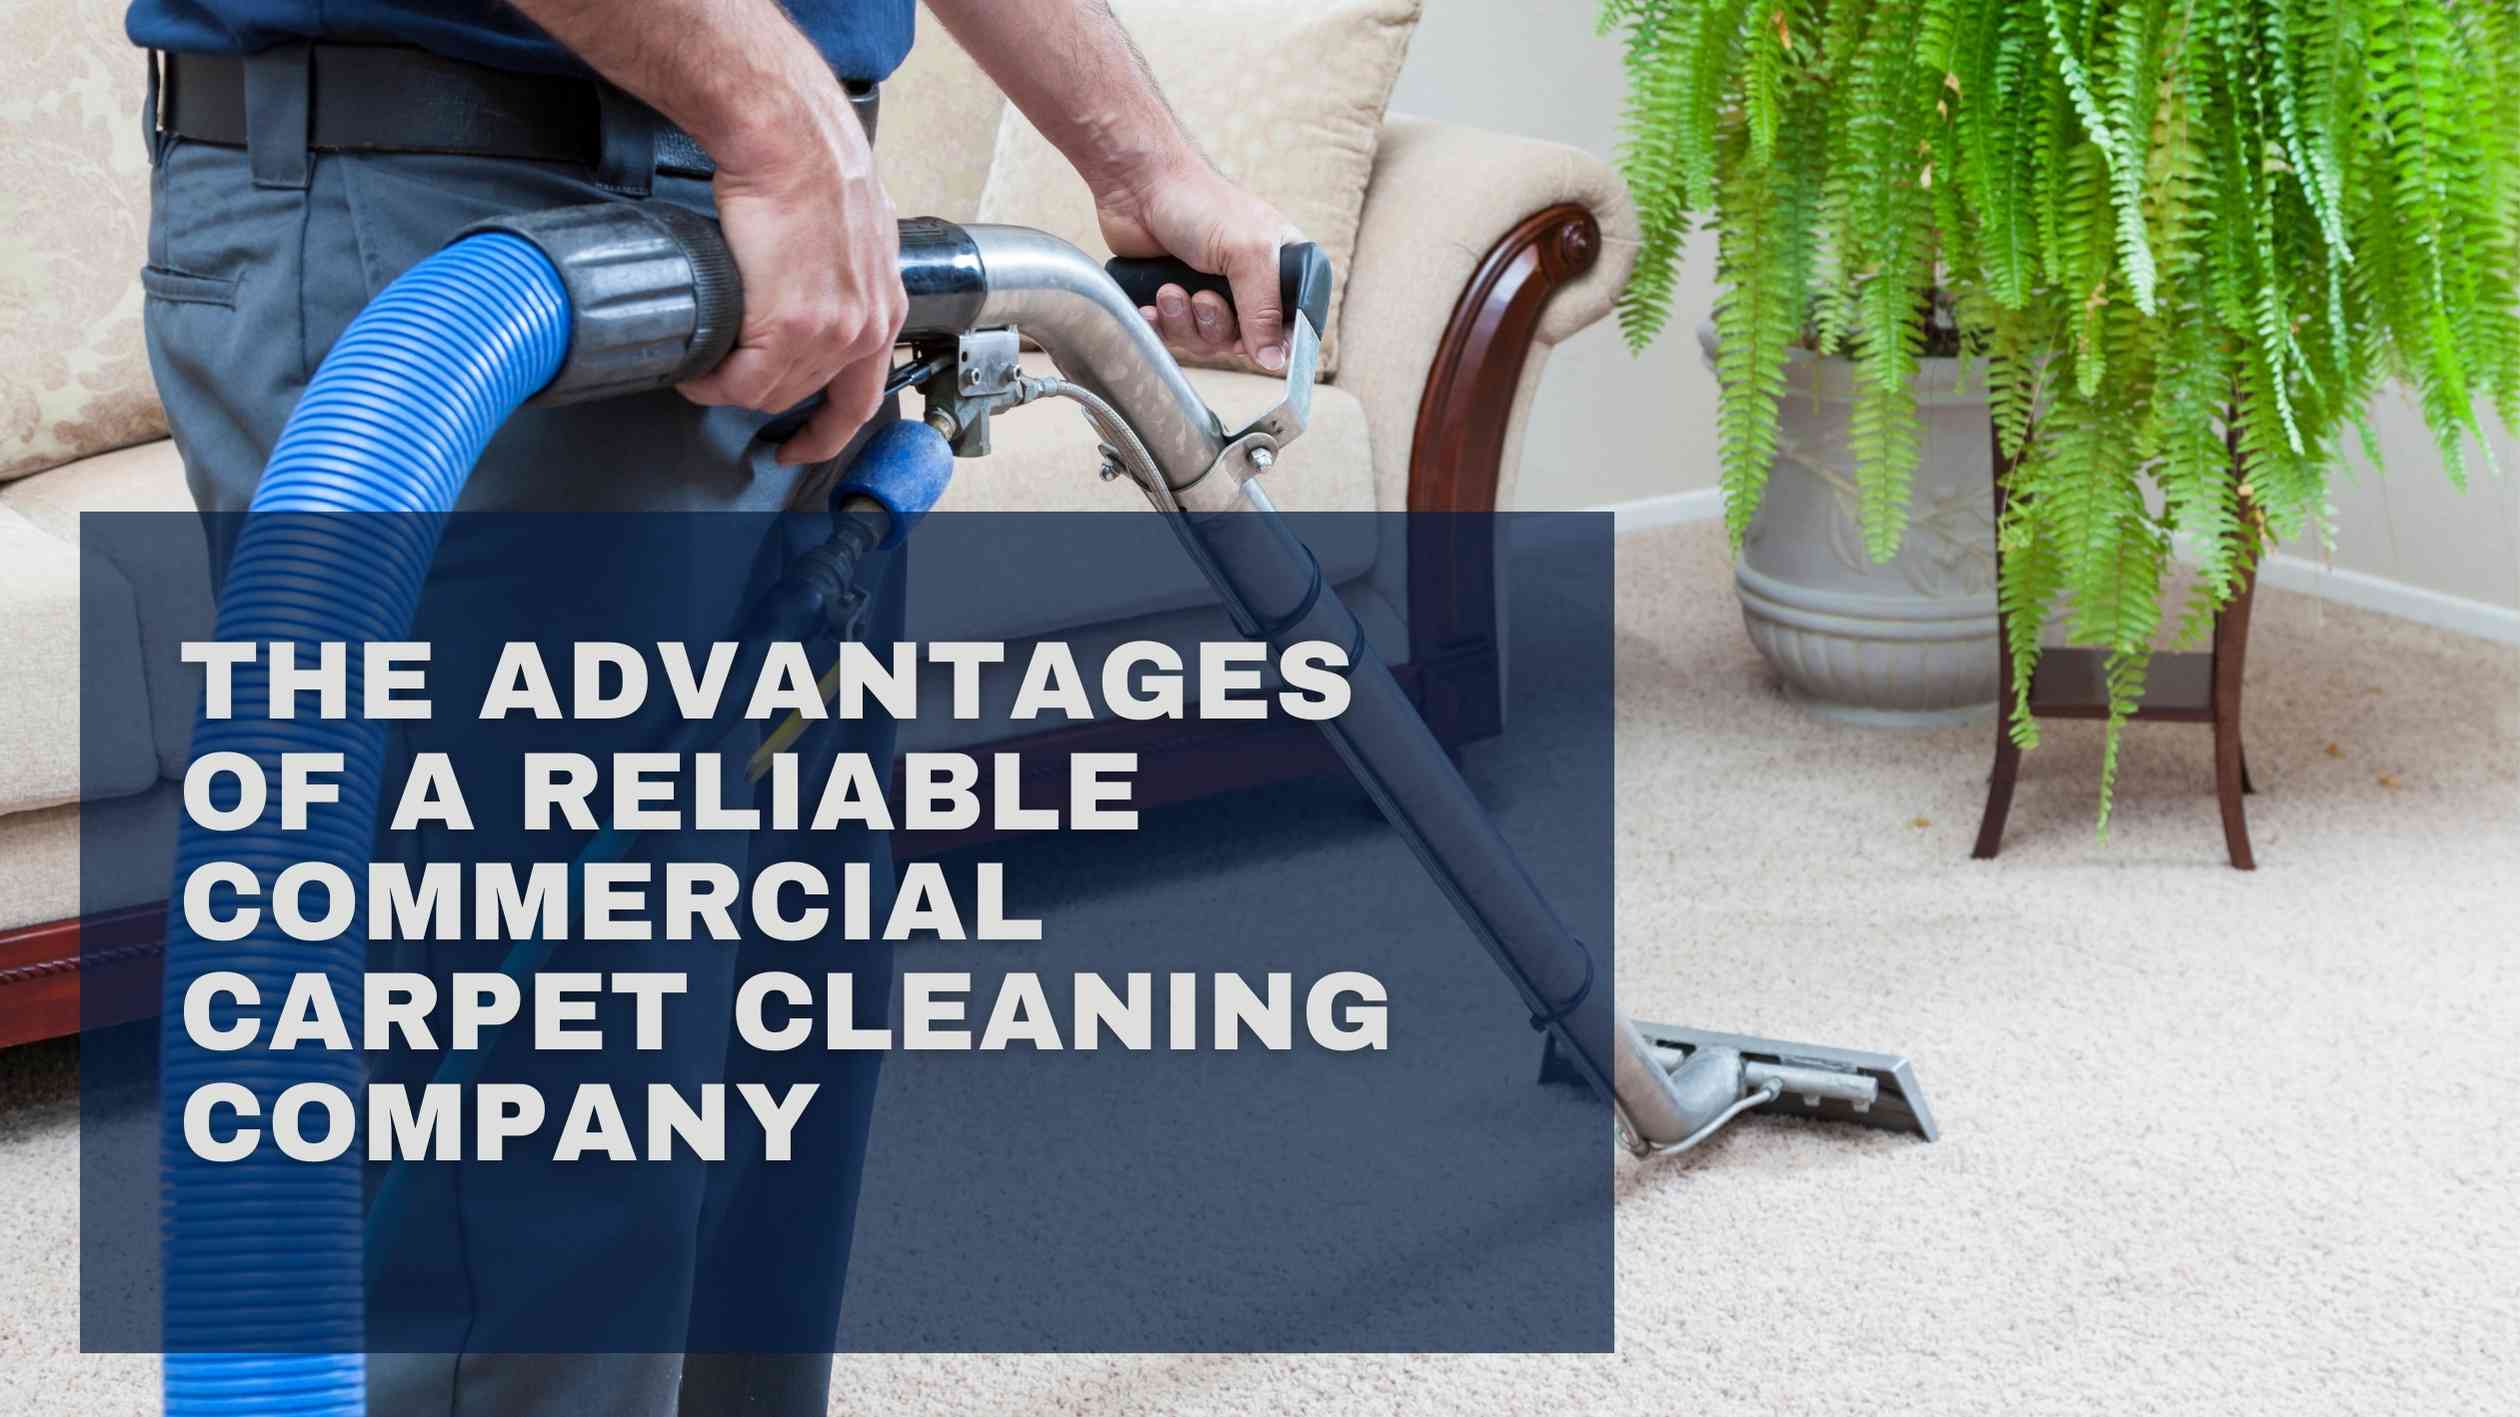 The Advantages of a Reliable Commercial Carpet Cleaning